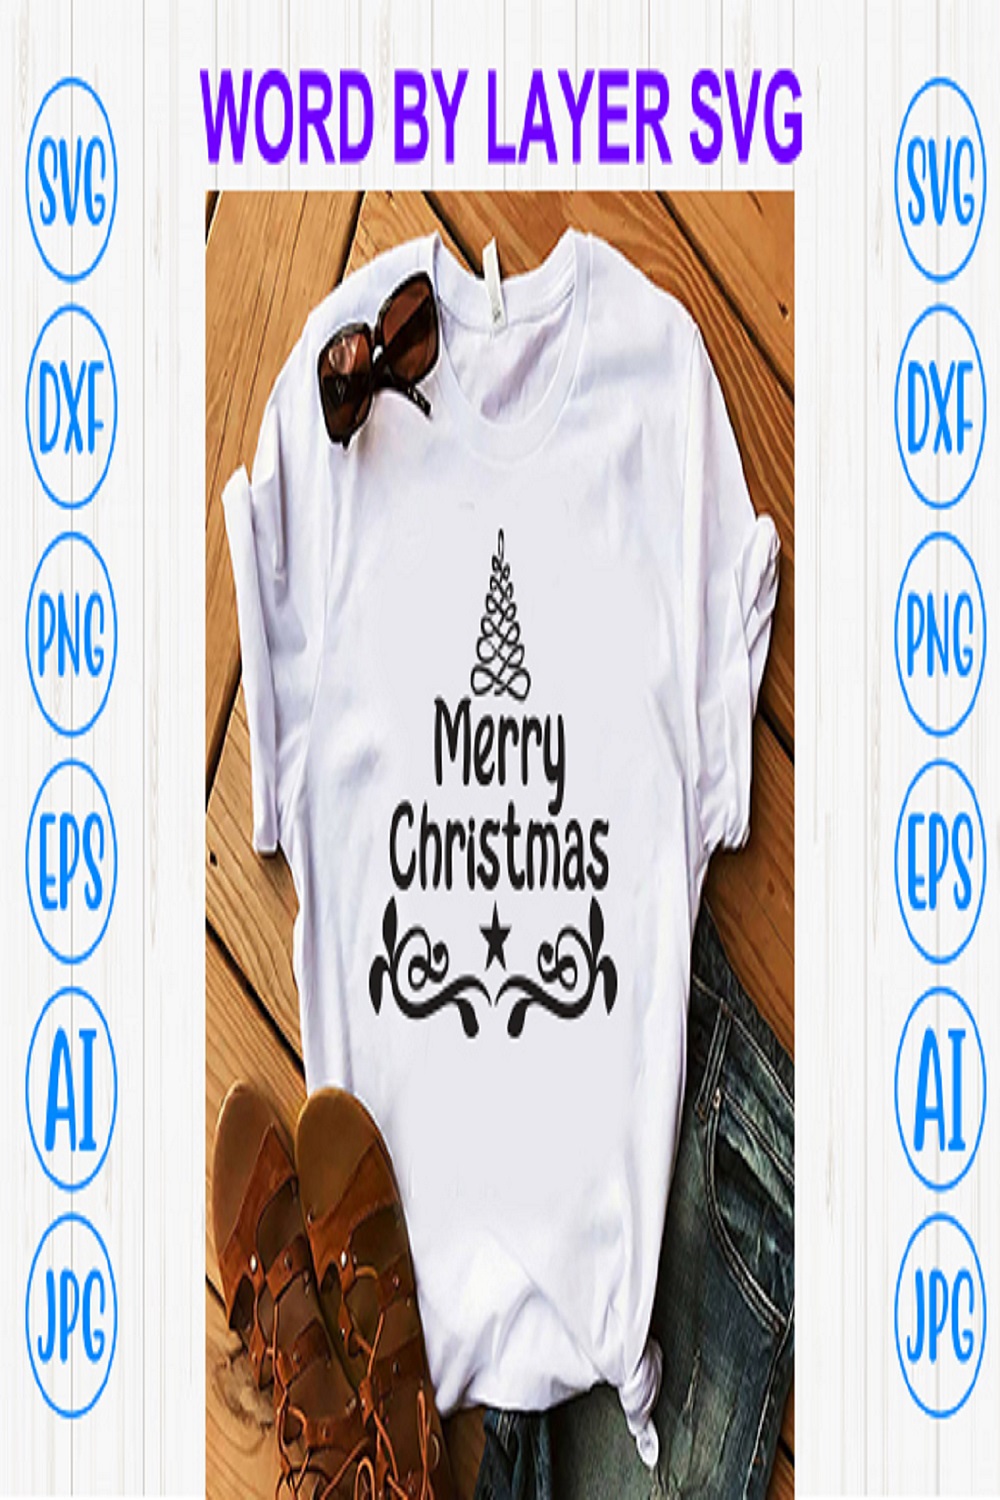 Merry Christmas svg pinterest preview image.